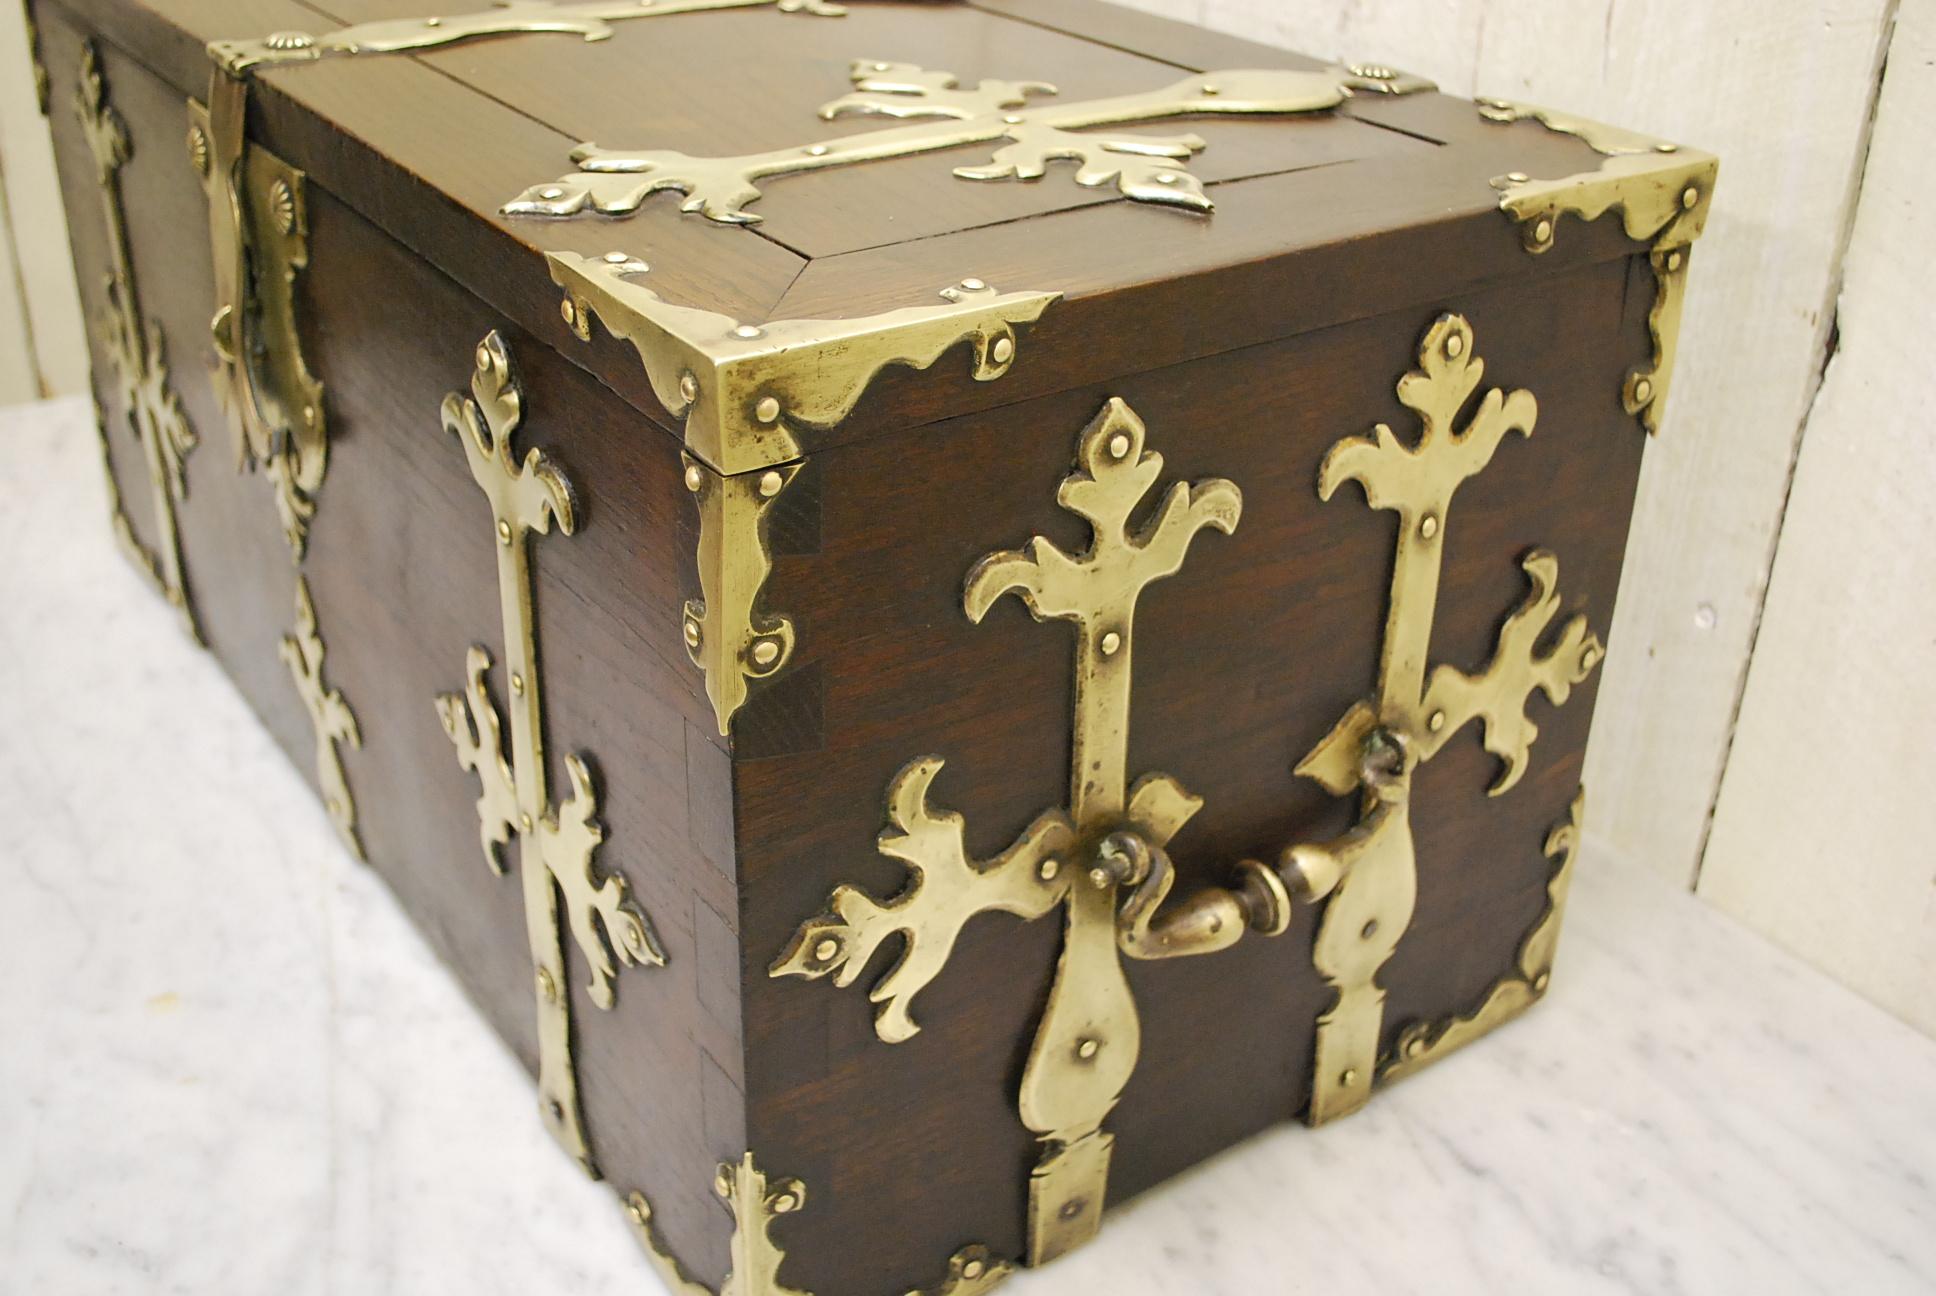 Renaissance Early 18th Century Antique Spanish Strong Box or Treasure Chest For Sale